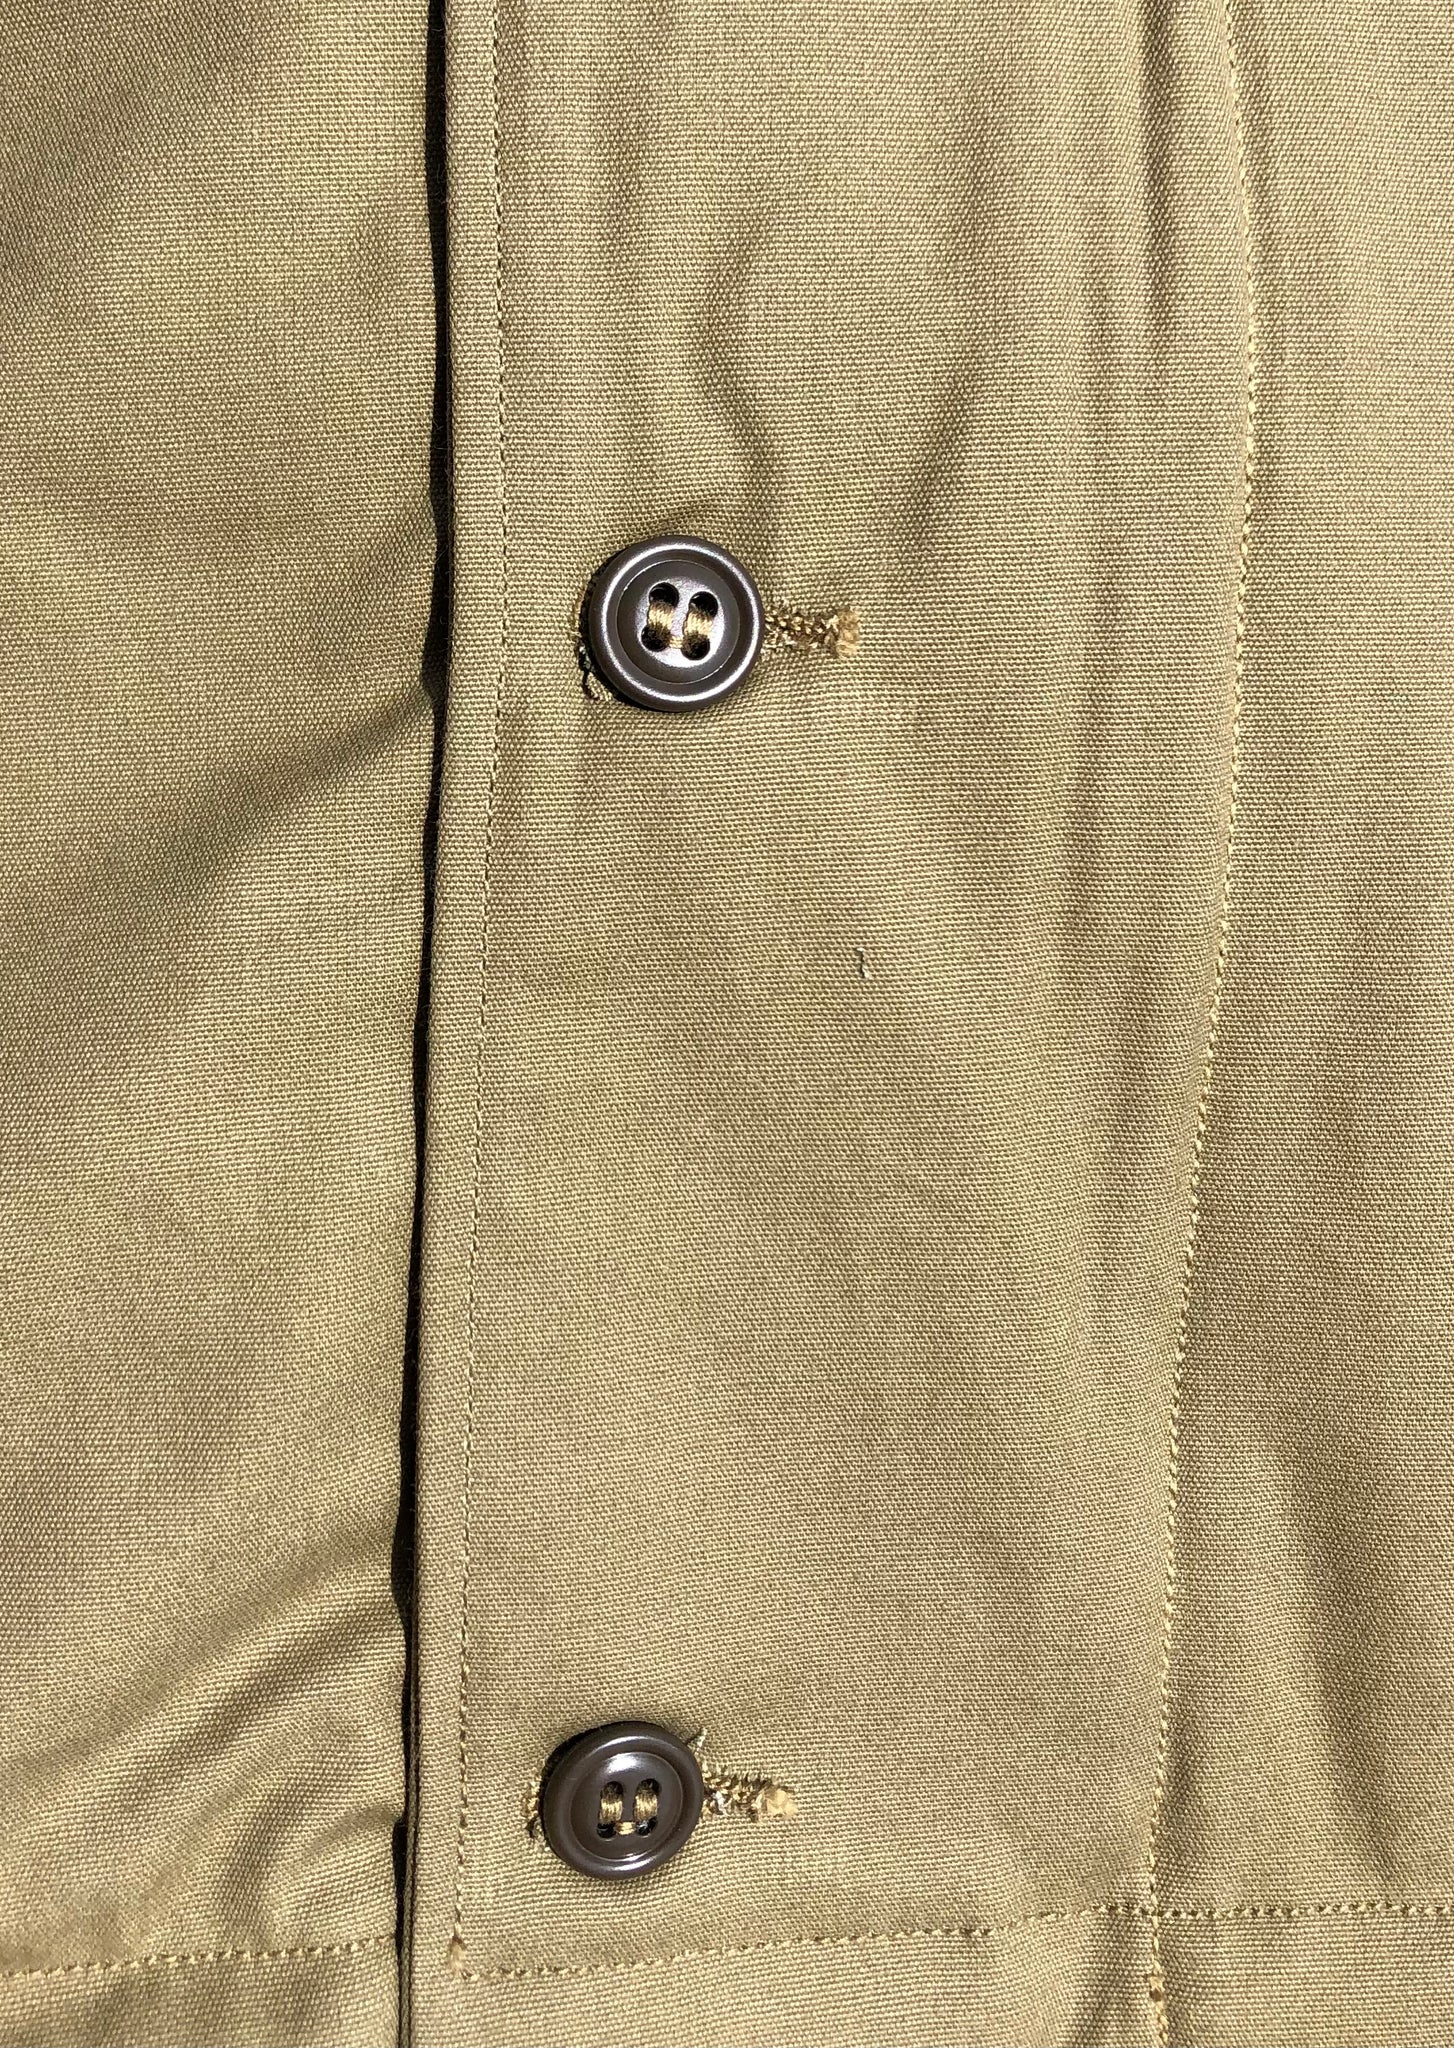 Buttons, Jacket, M41, 20 – WWII Impressions, Inc.